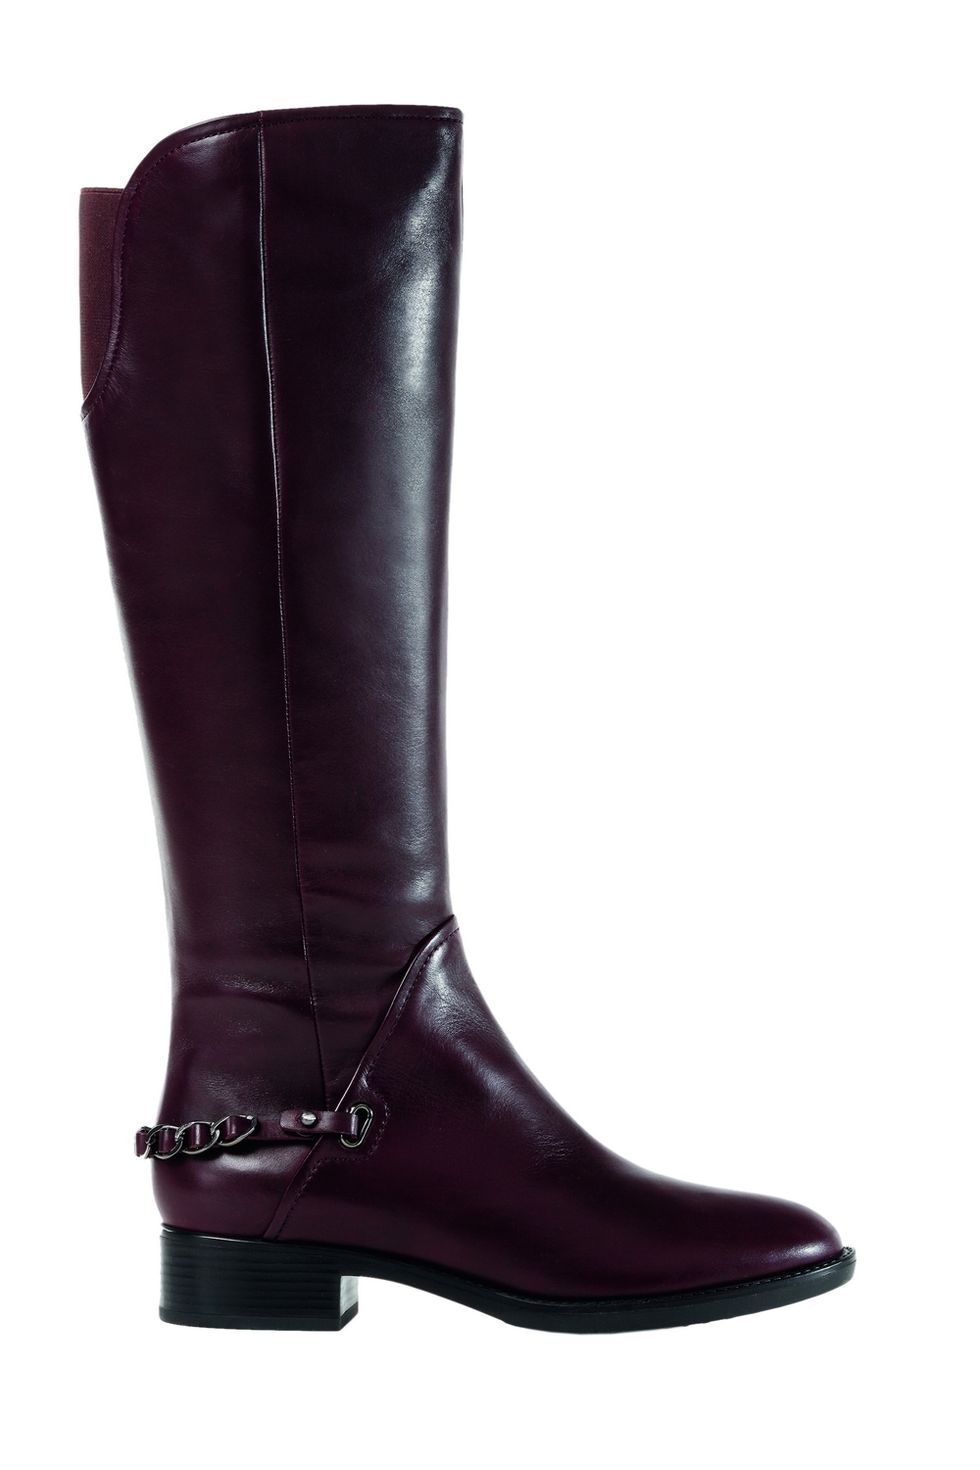 Footwear, Brown, Boot, Shoe, Leather, Tan, Liver, Maroon, Riding boot, Knee-high boot, 